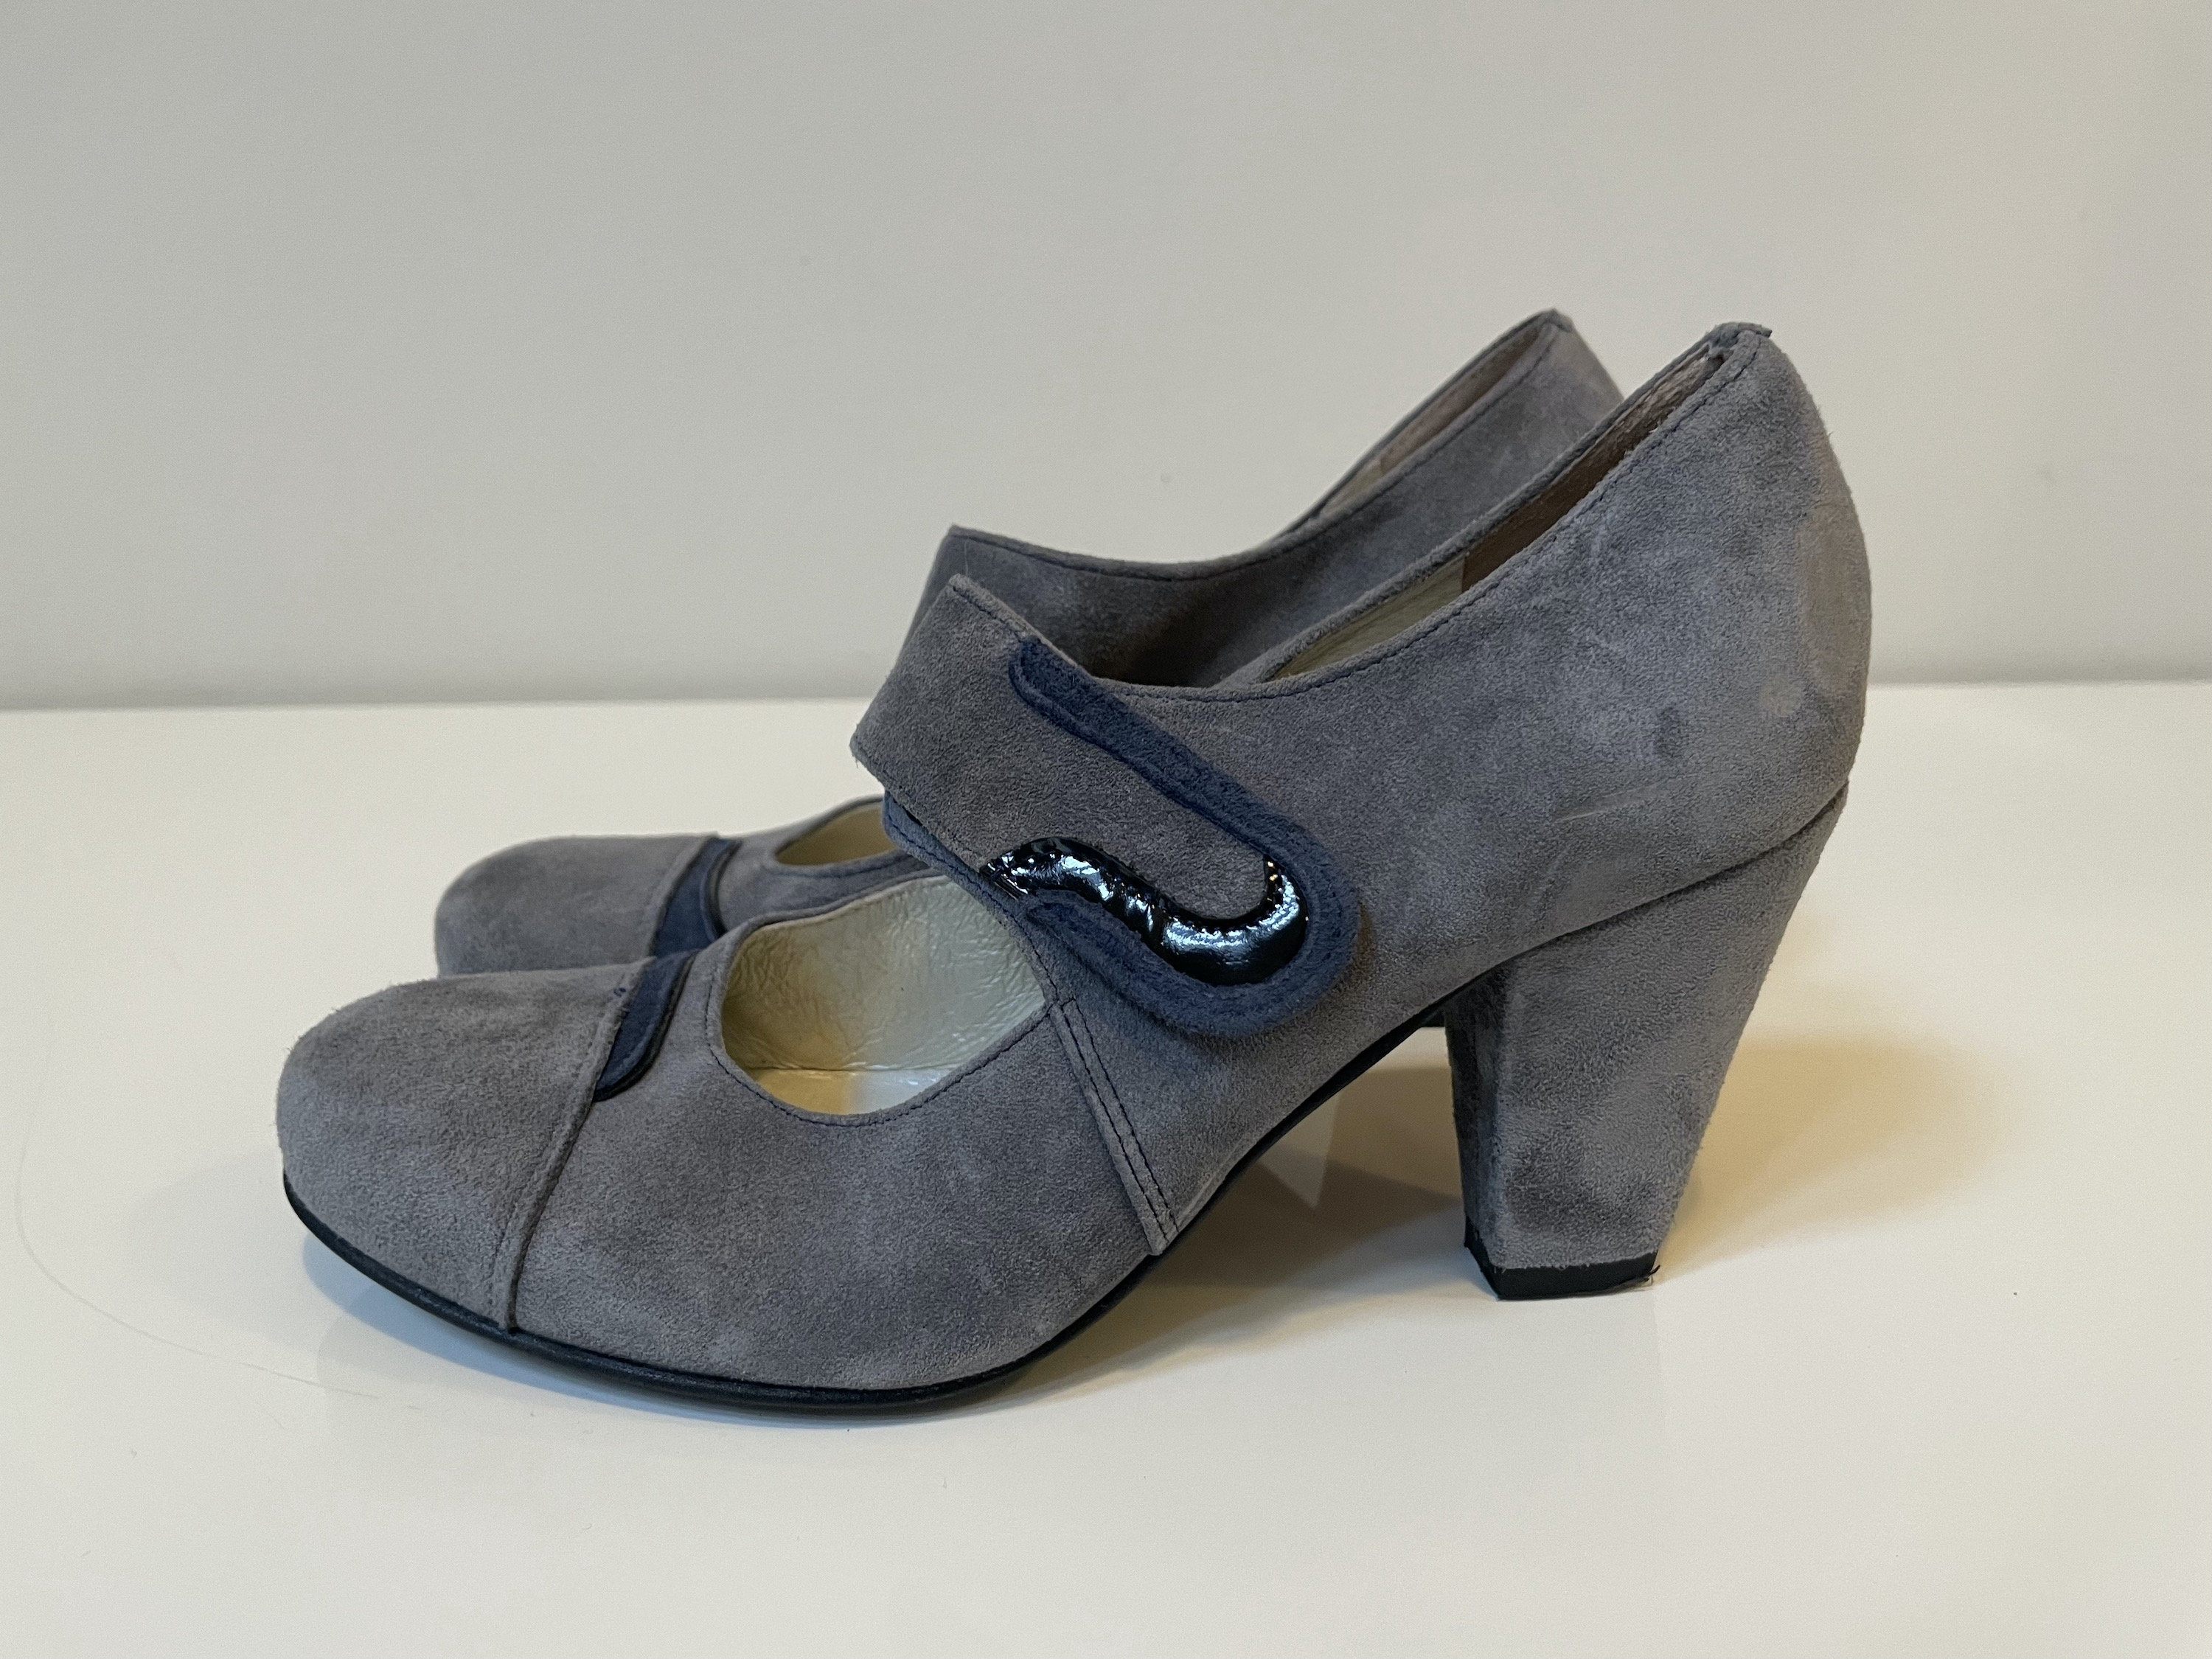 Sofft Obella Gray Suede Leather Mary Jane Pumps Heels Shoes Size 7 M Women's